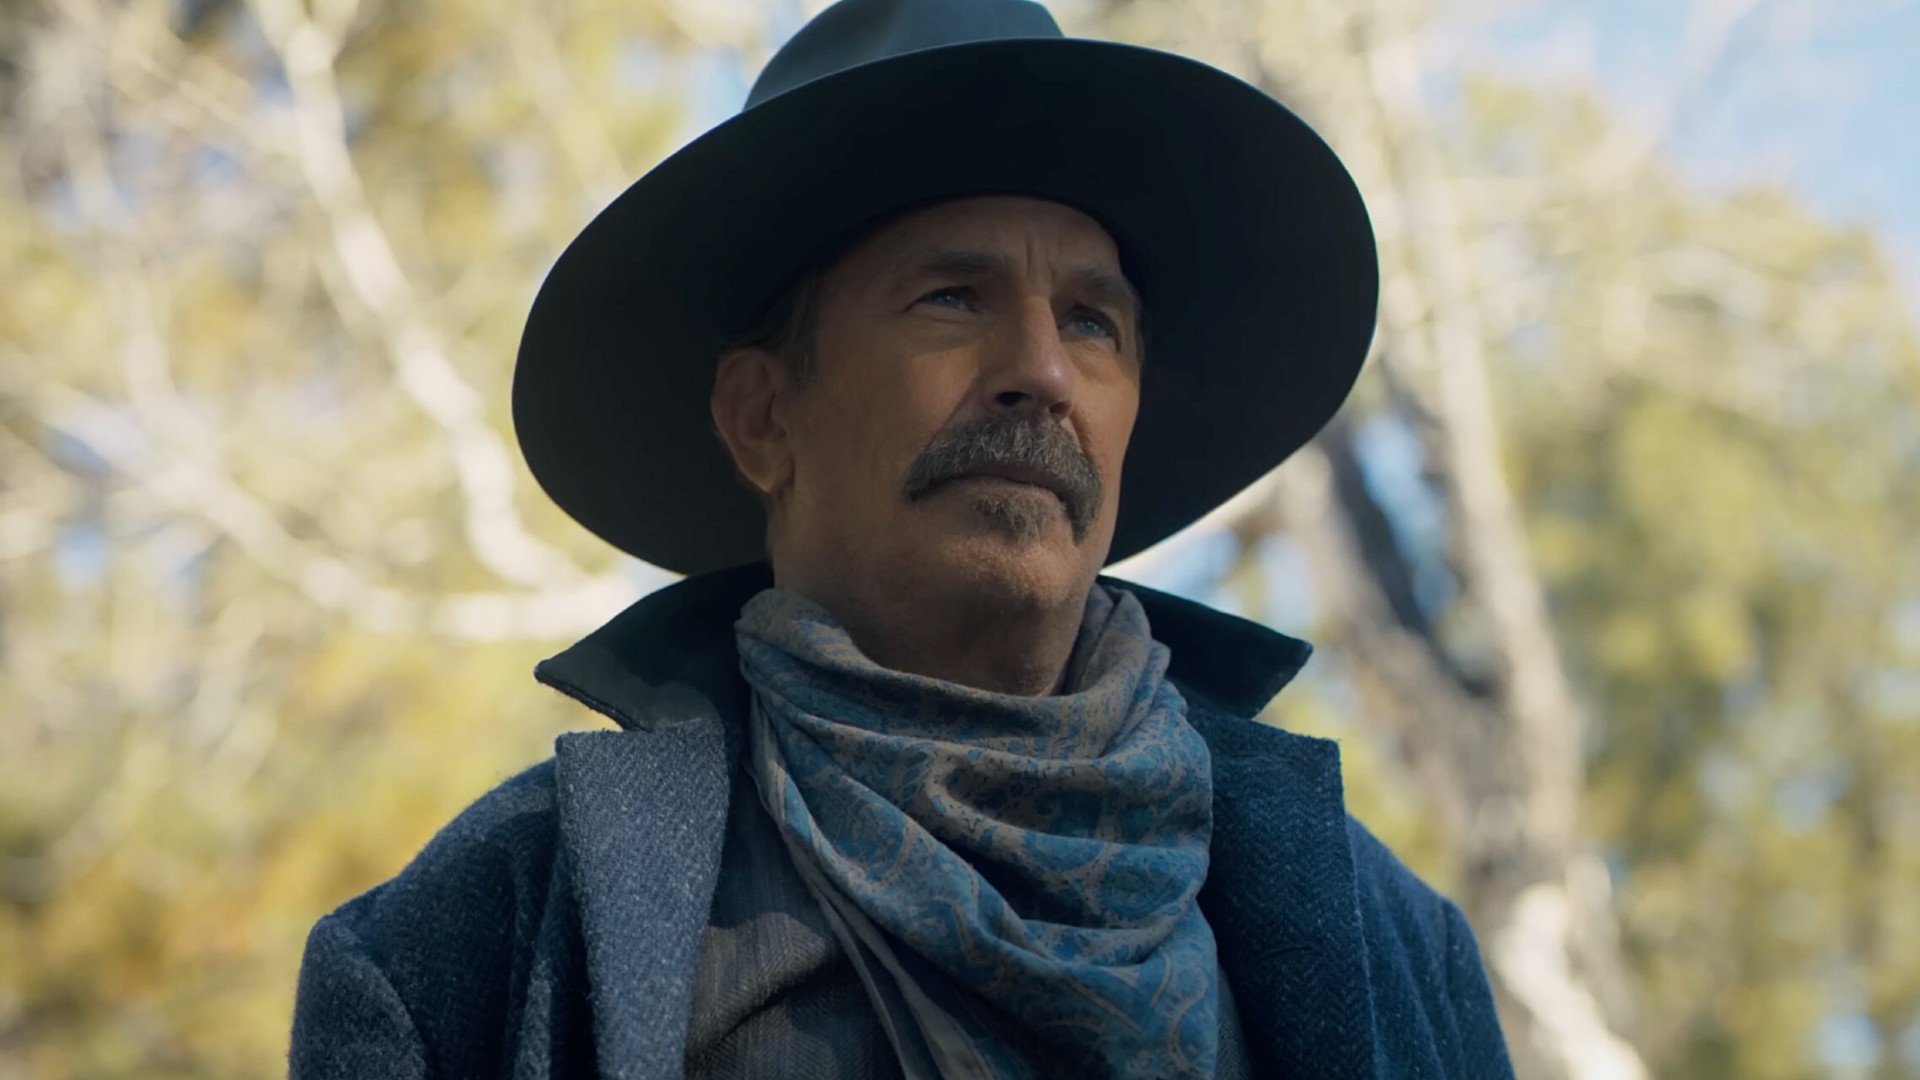 Kevin Costner stares with cowboy flintiness in a still from Horizon: An American Saga—Chapter 1